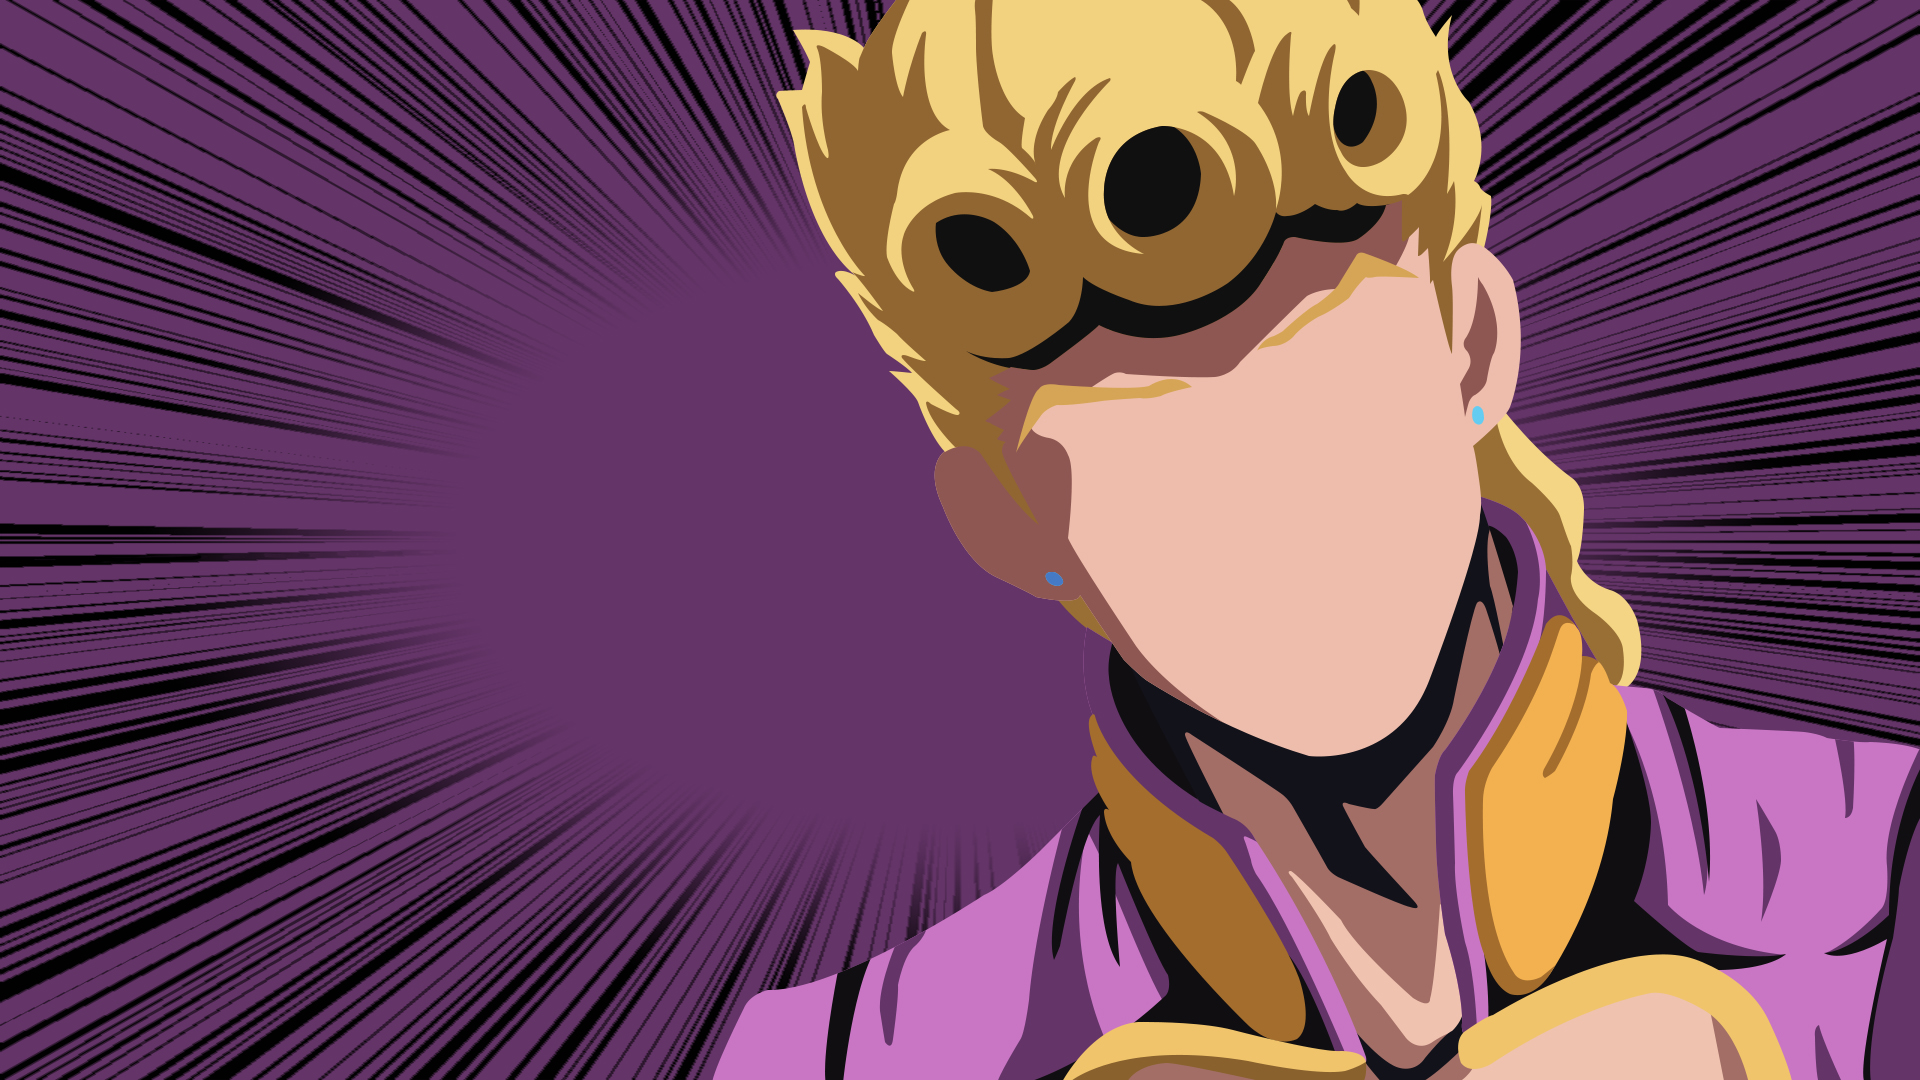 Jojo Giorno Giovanna With Wallpaper Of Purple And Black Line Abstract 2K Anime